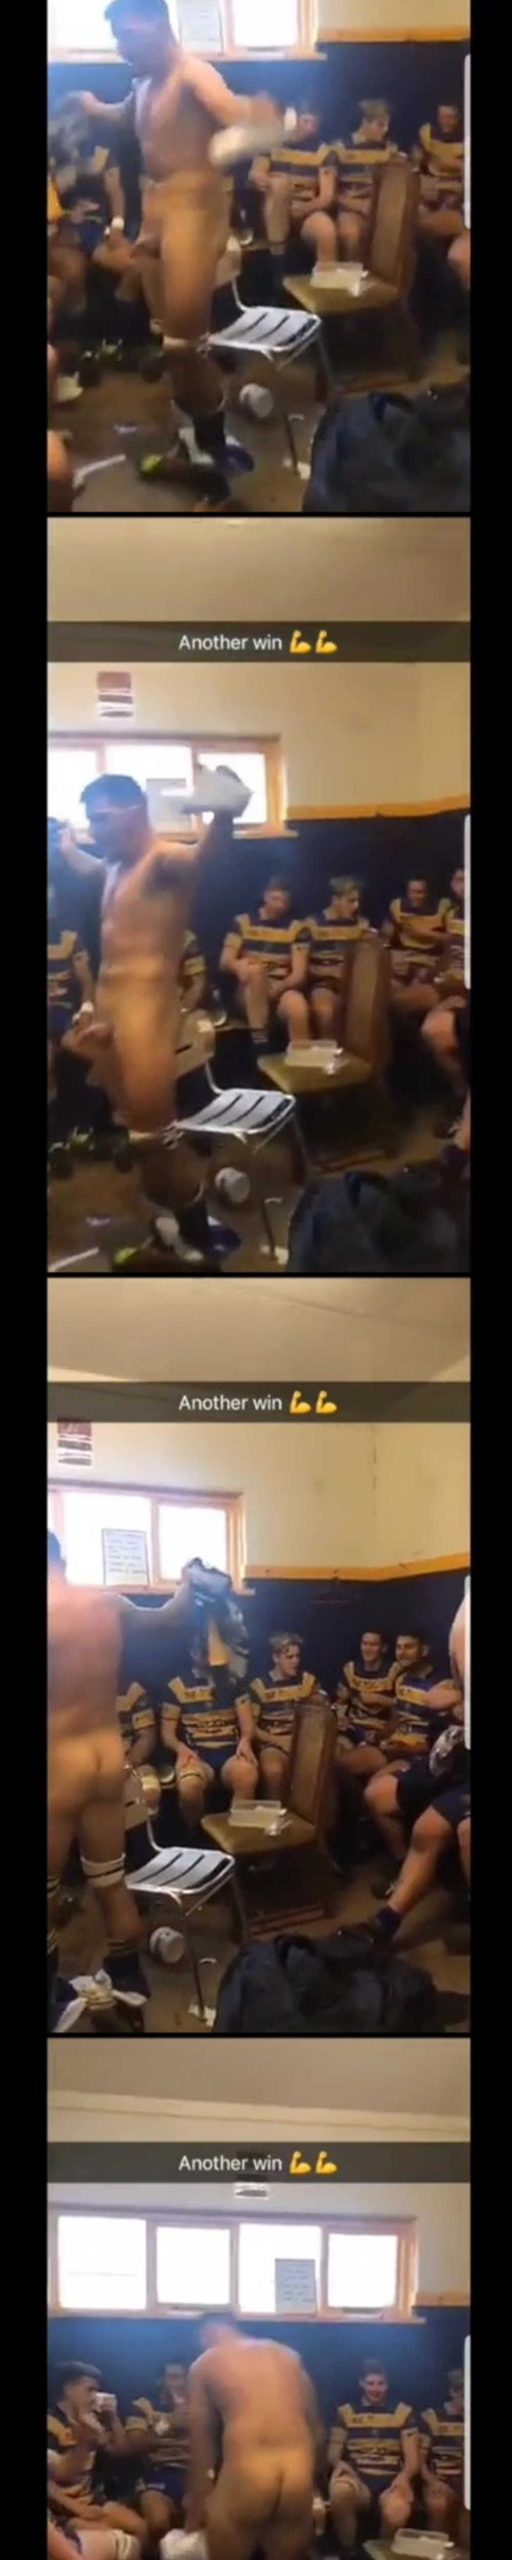 rugby players naked for locker room celebration